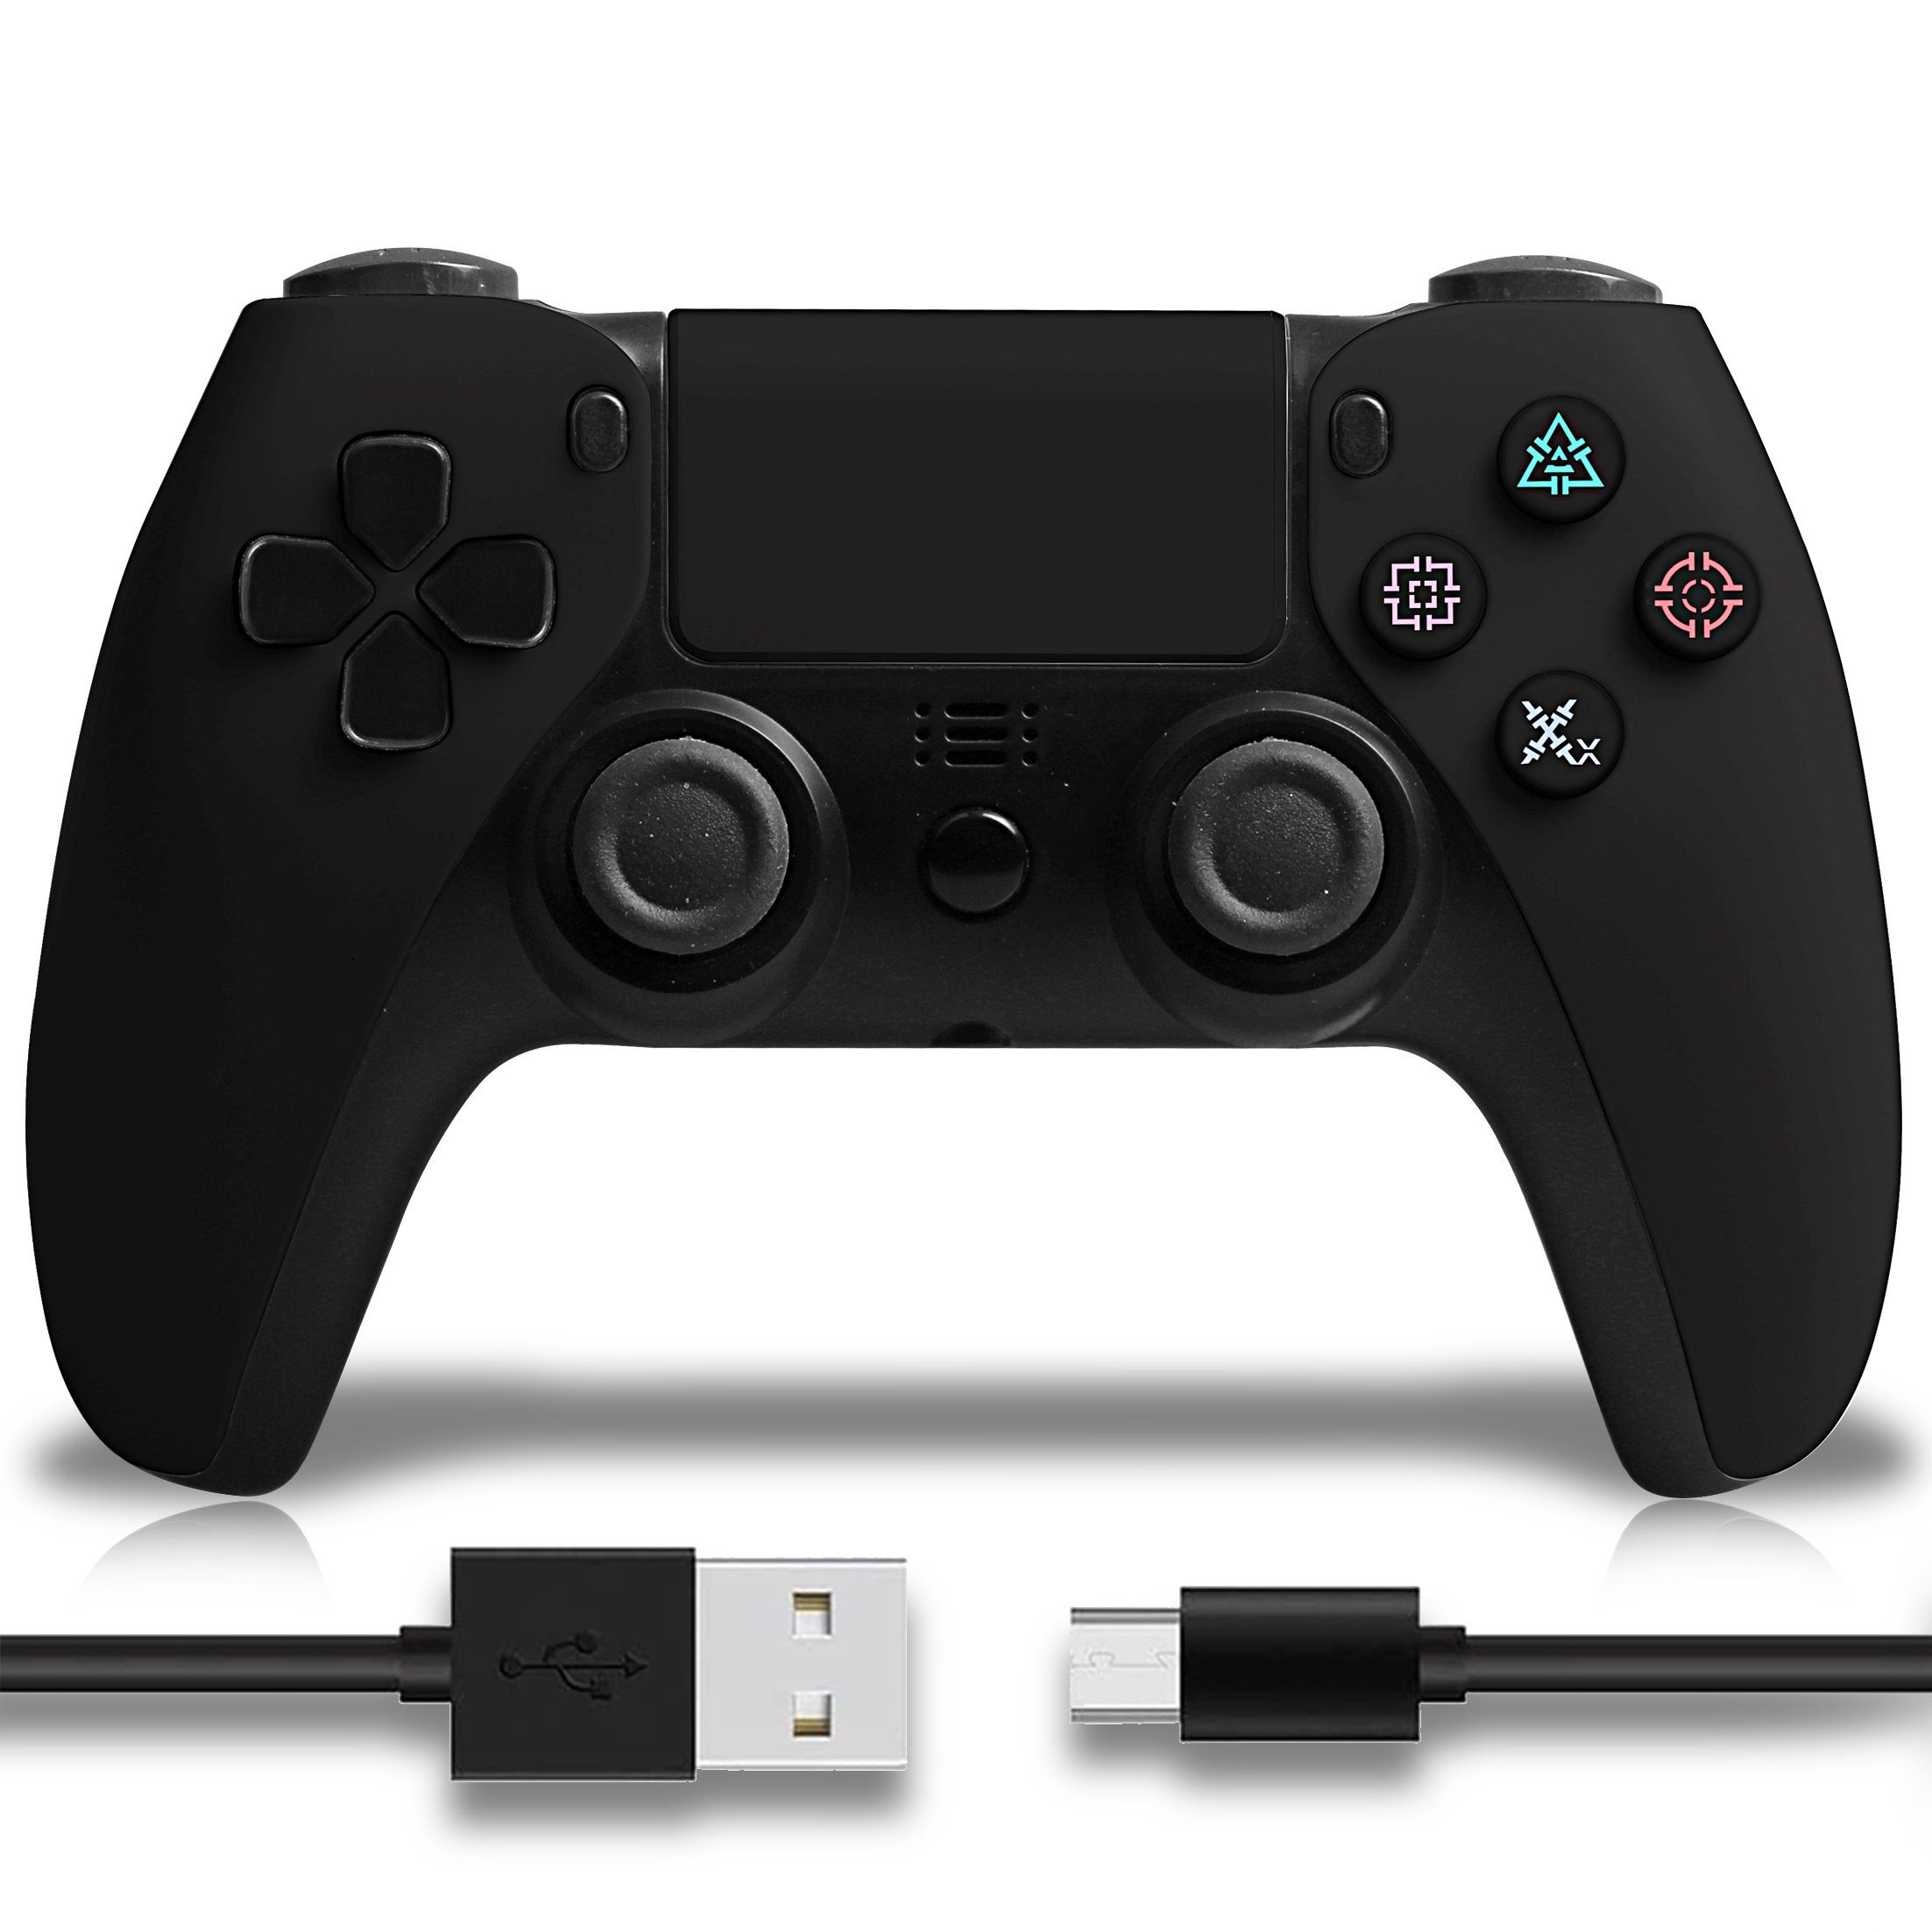 KINSI Wireless Gamepad, Controller, für PS4, Bluetooth, 5 Stile PlayStation-Controller (Dampf volle Funktion PS5 Formfaktor PS4 Gamepad)